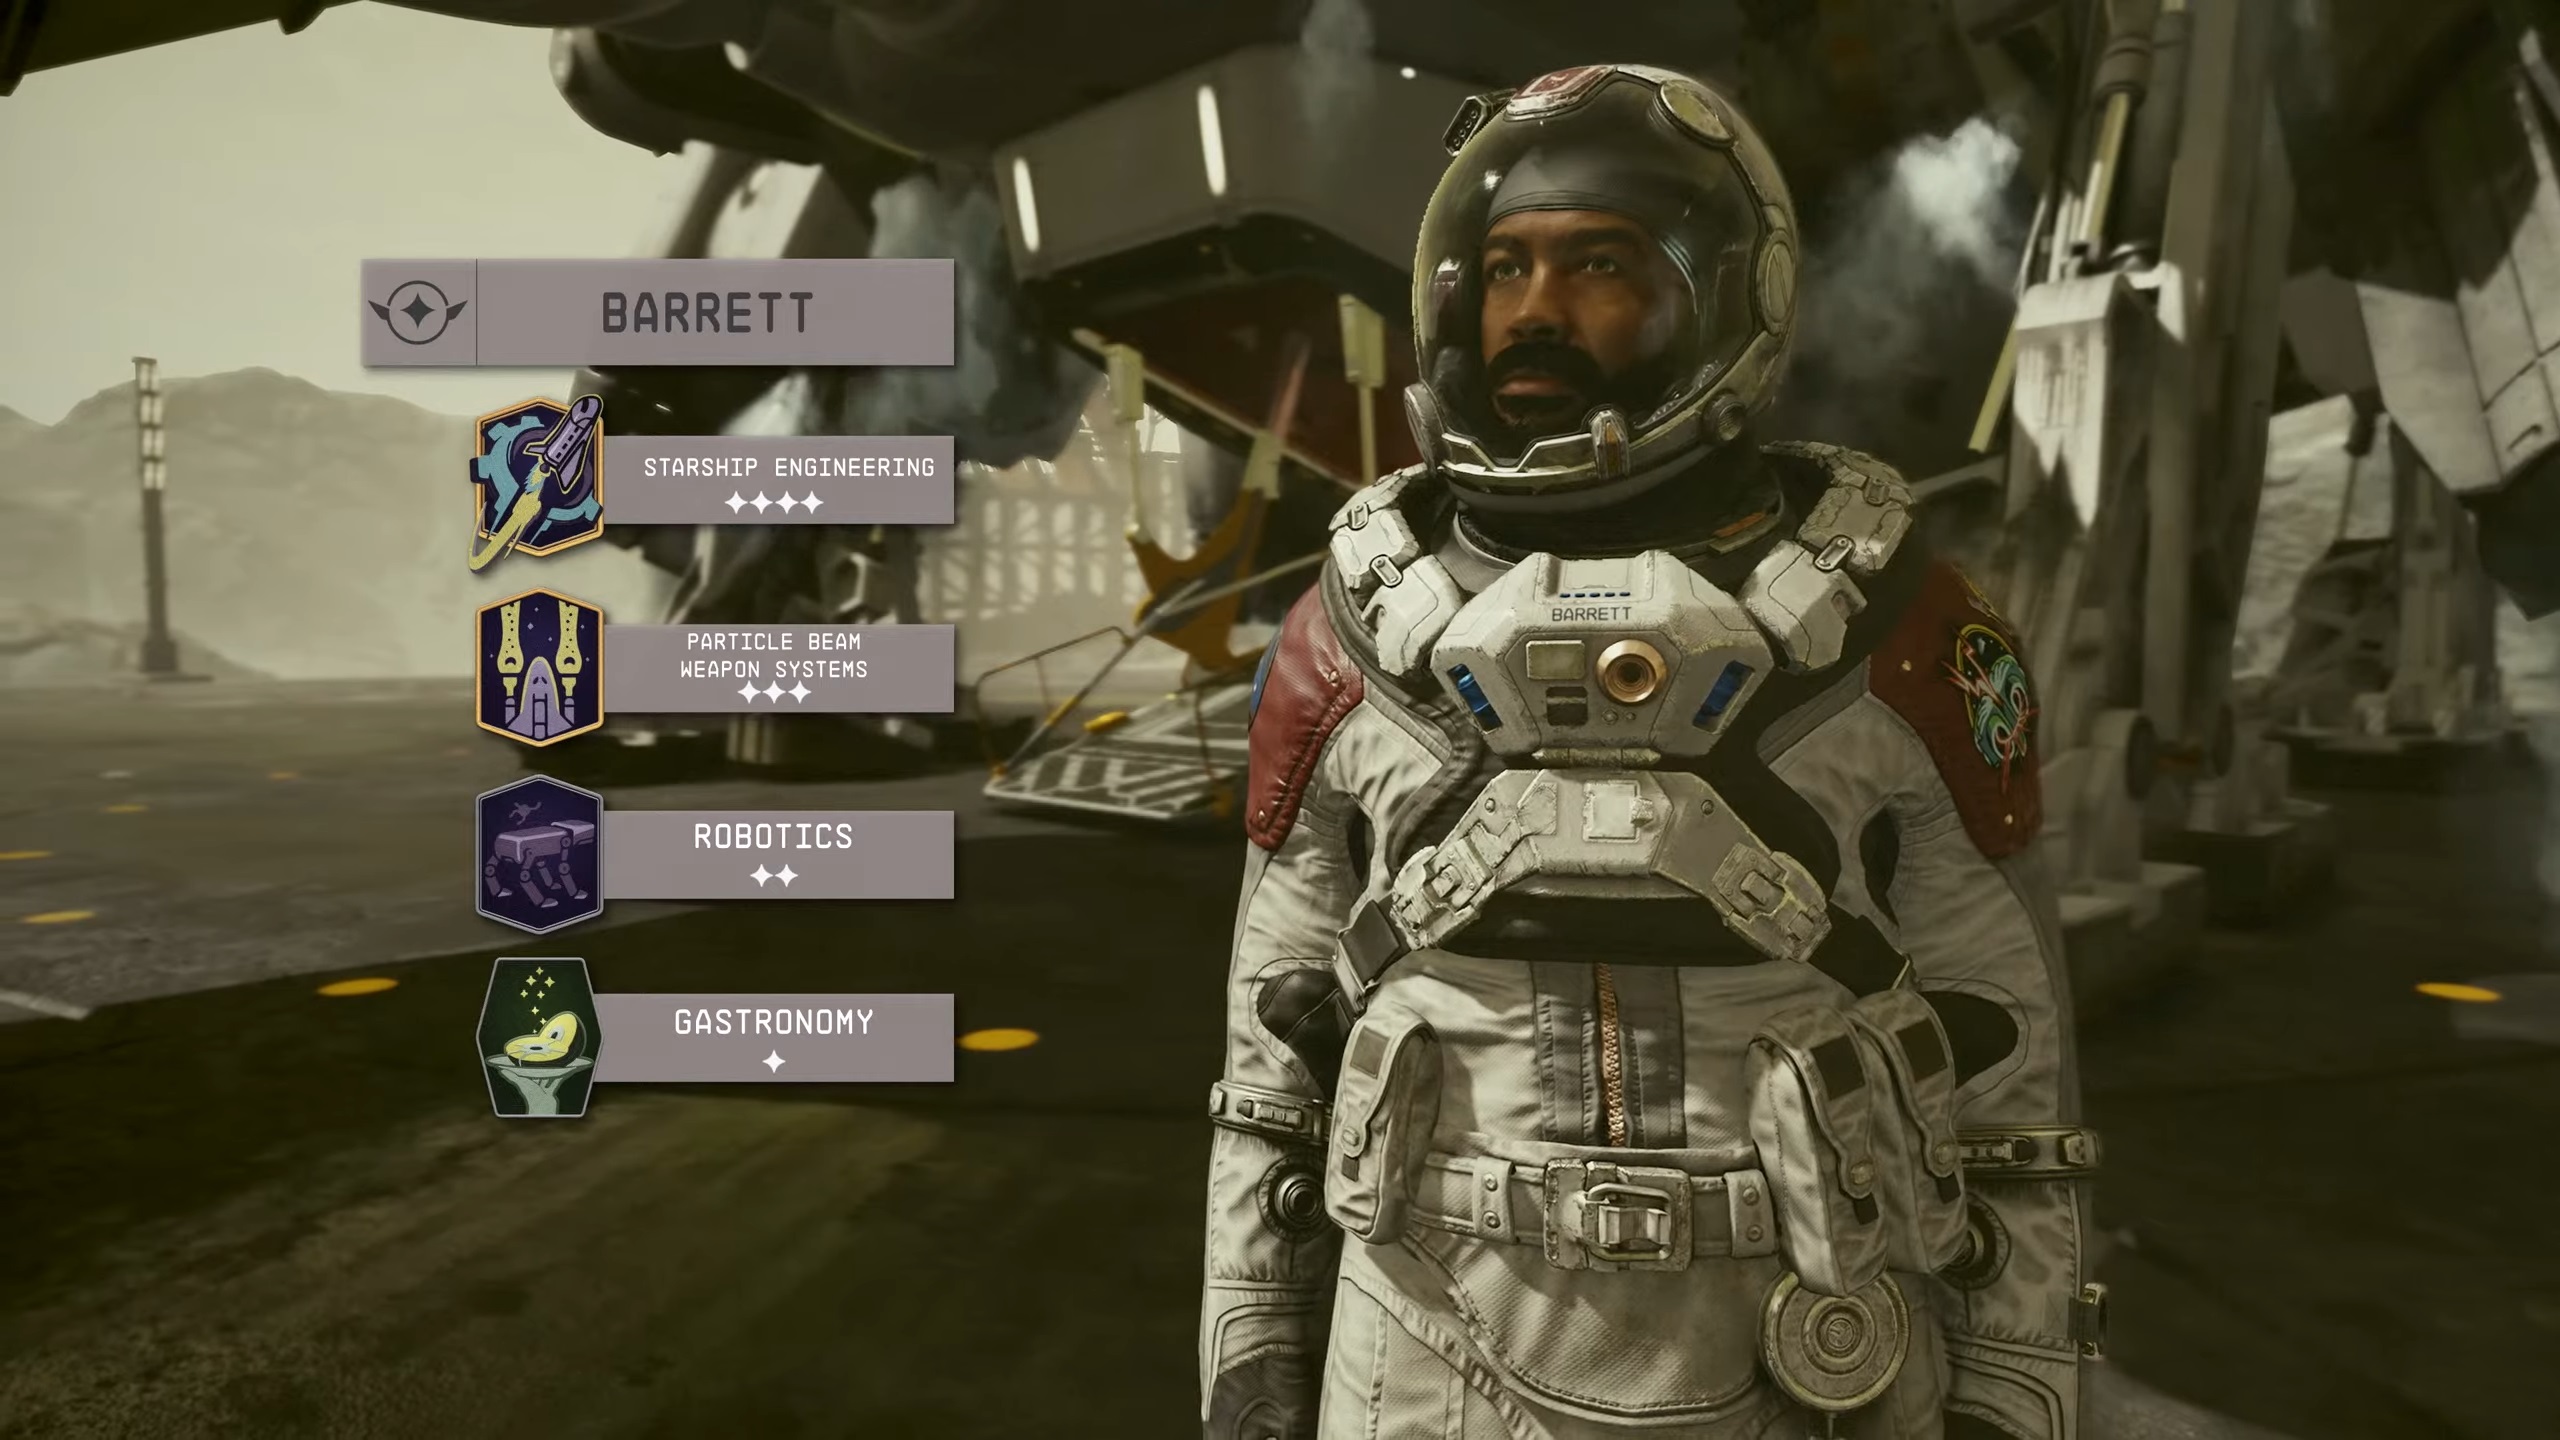 Starfield companions - Barrett, a man in a white space suit beside an overlay displaying his skills